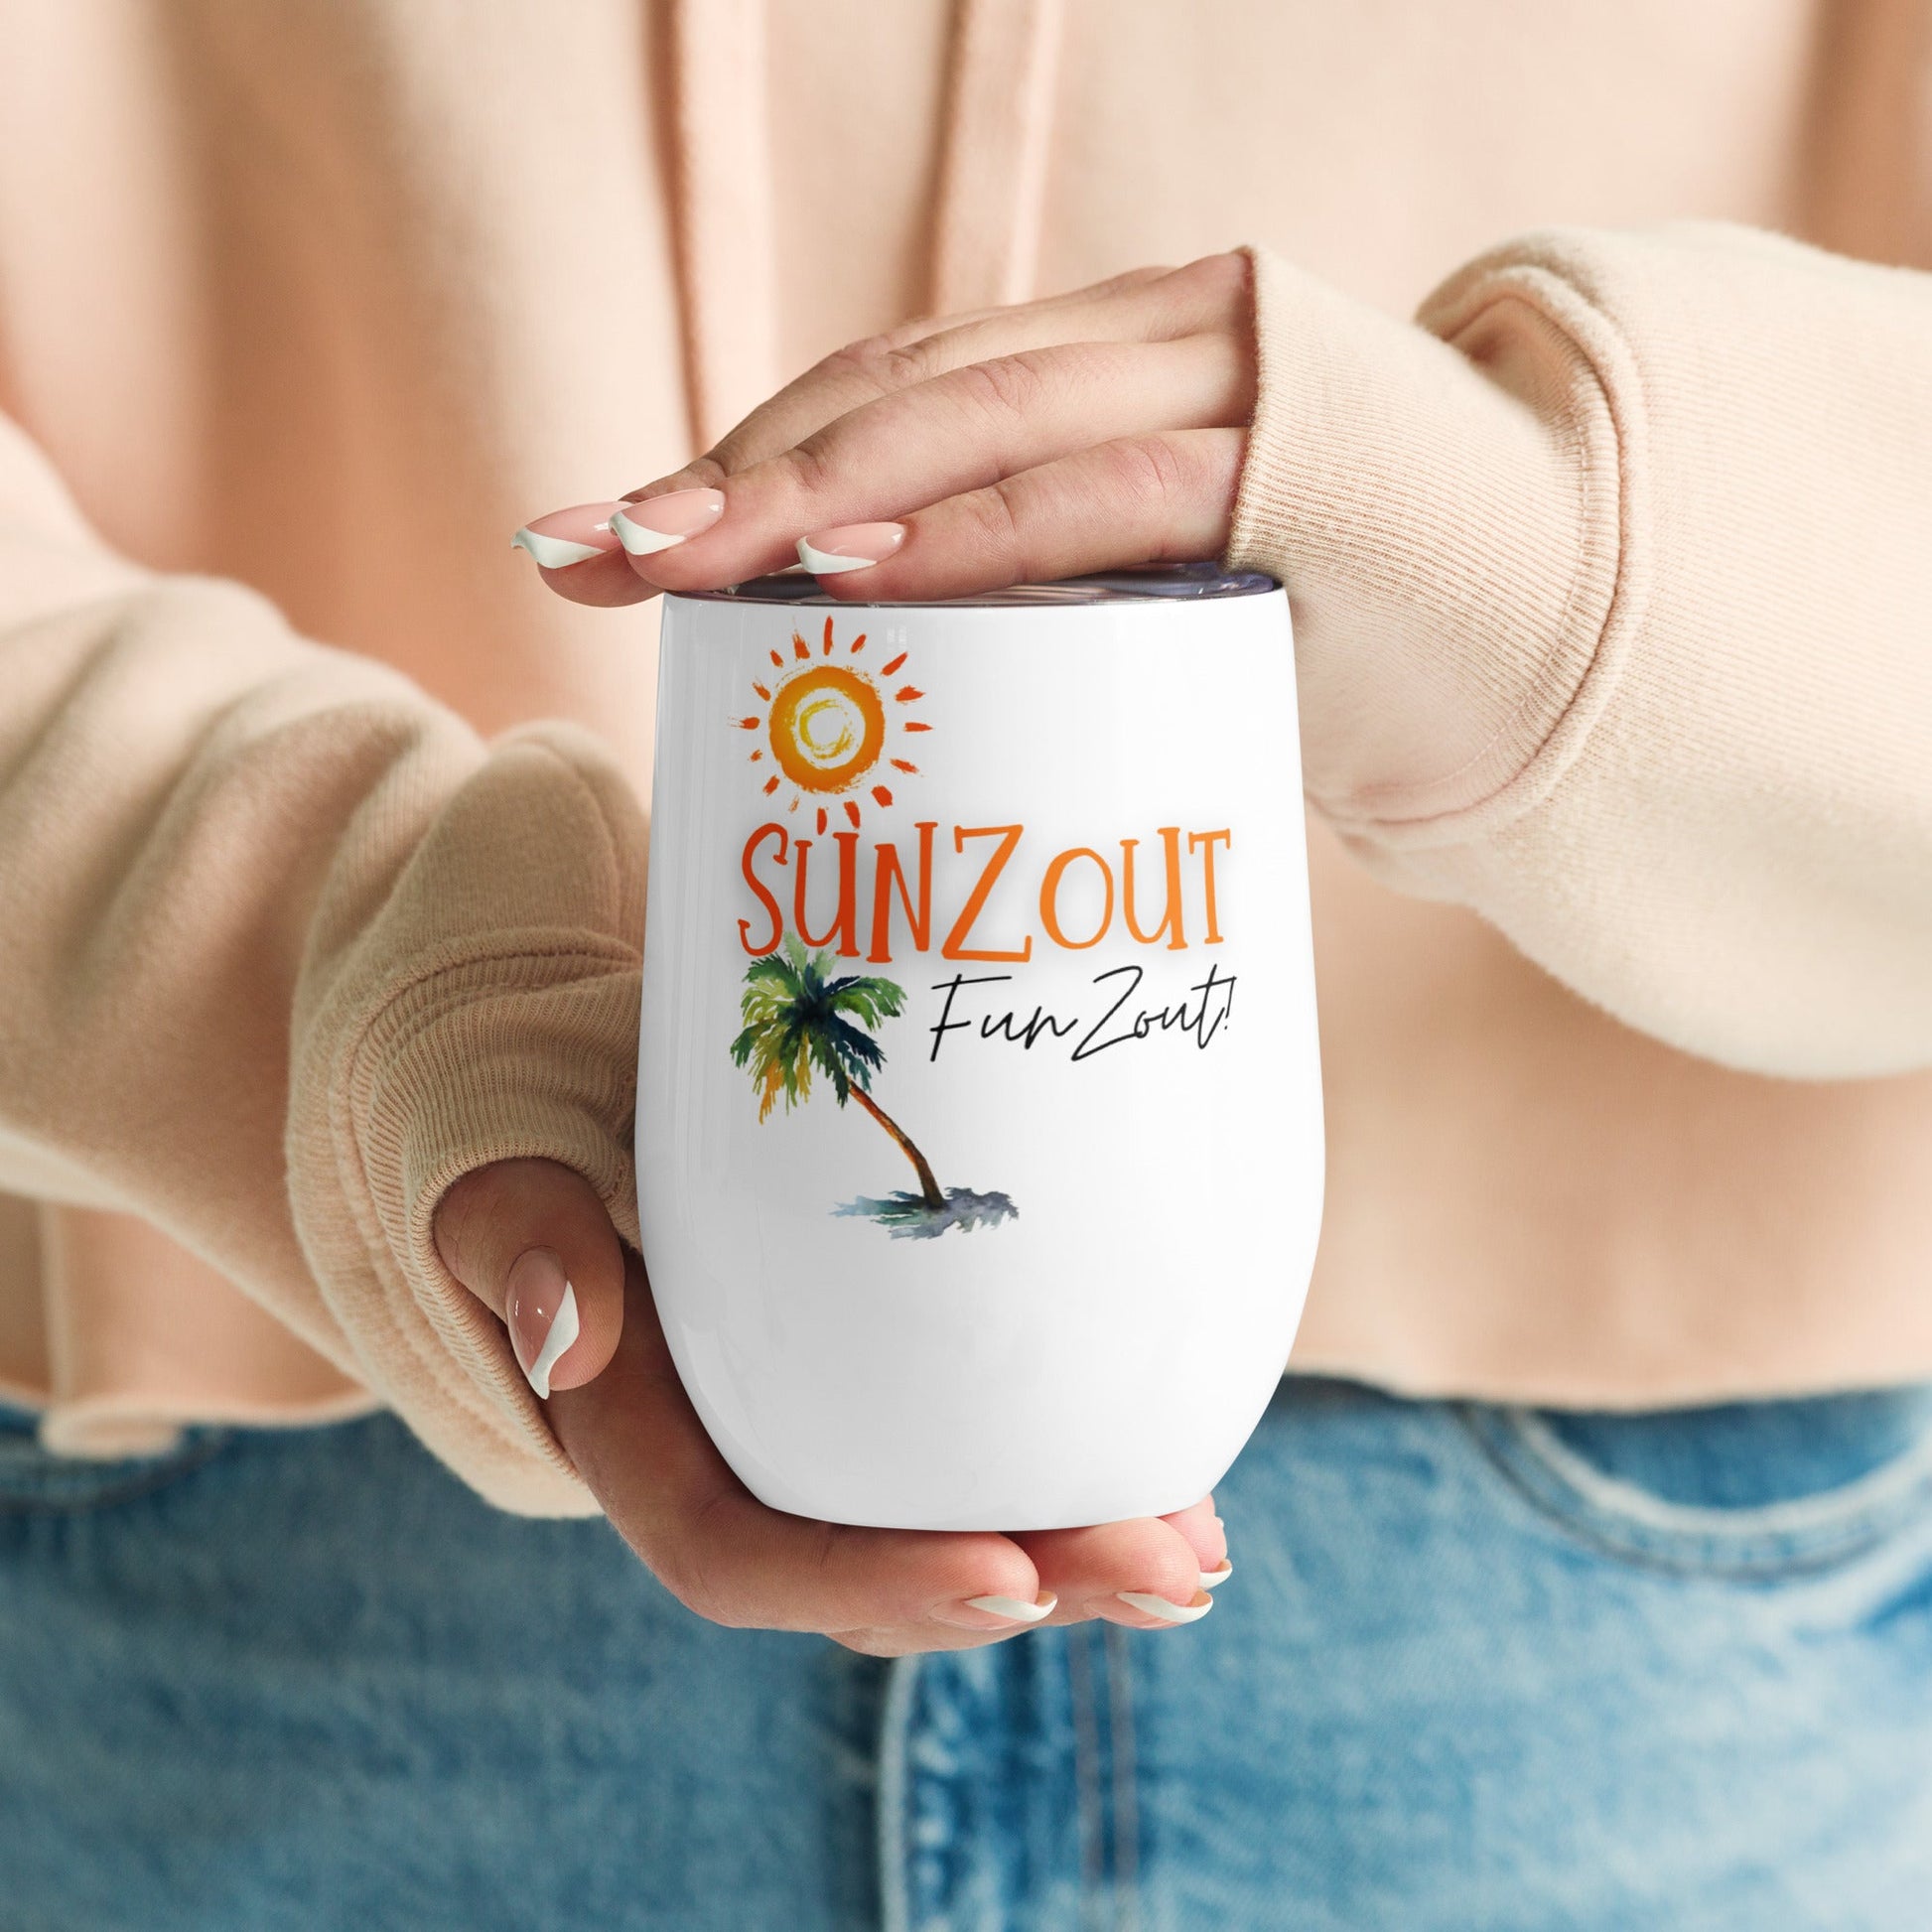 Sunzout Funzout Wine tumbler - Sunzout Outdoor Spaces LLC